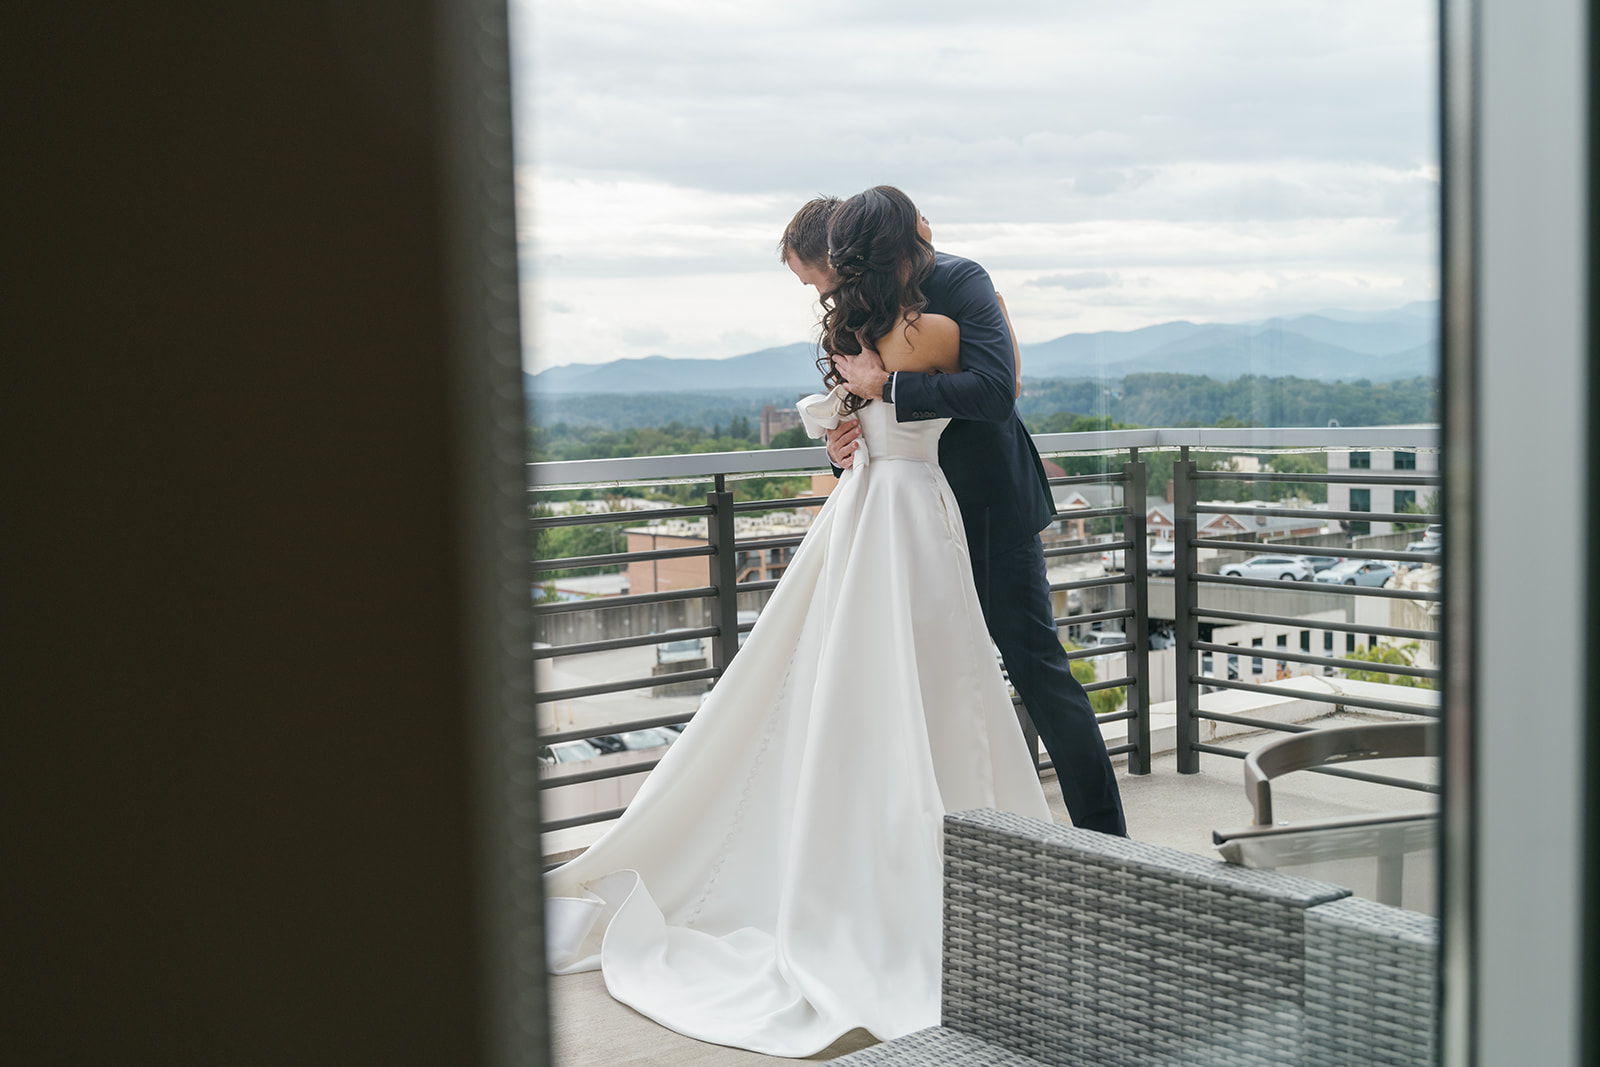 Looking through the window at bride and groom sharing a first look with Asheville city scape in the background.  Photogr